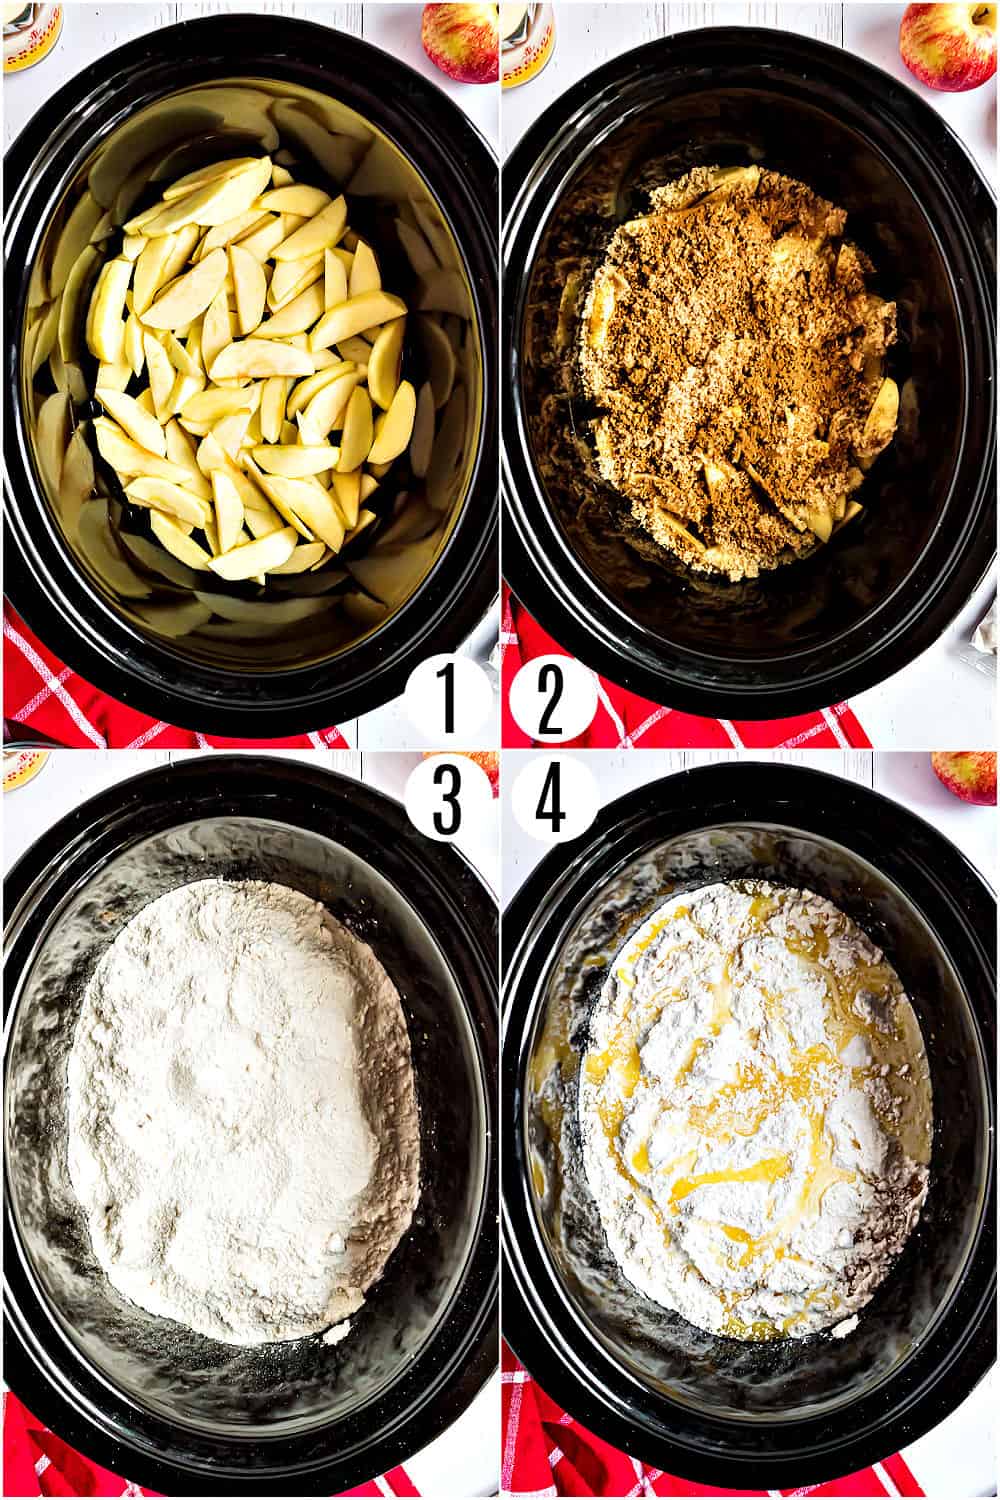 Step by step photos showing how to make apple cake in a crockpot.